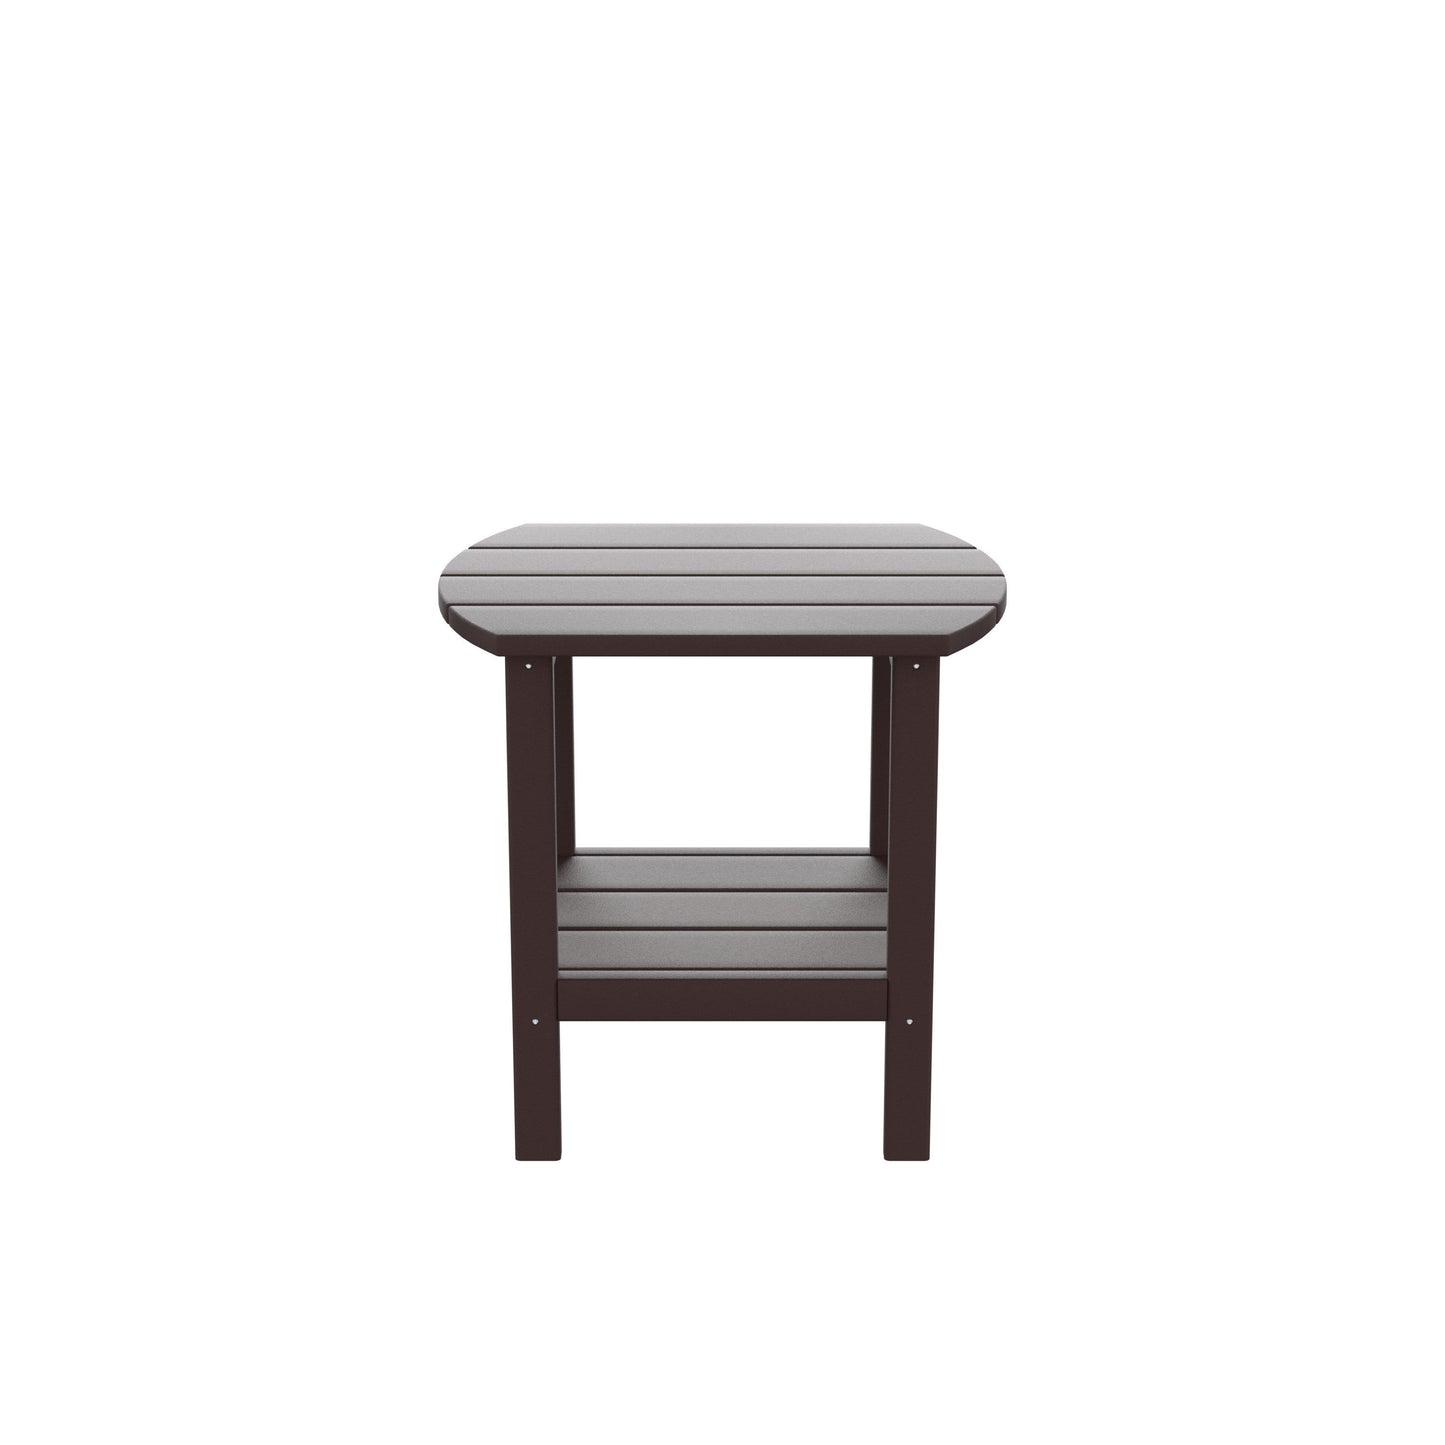 HDPE side table,adirondack table,porch table, patio table for outdoor and pool Brown